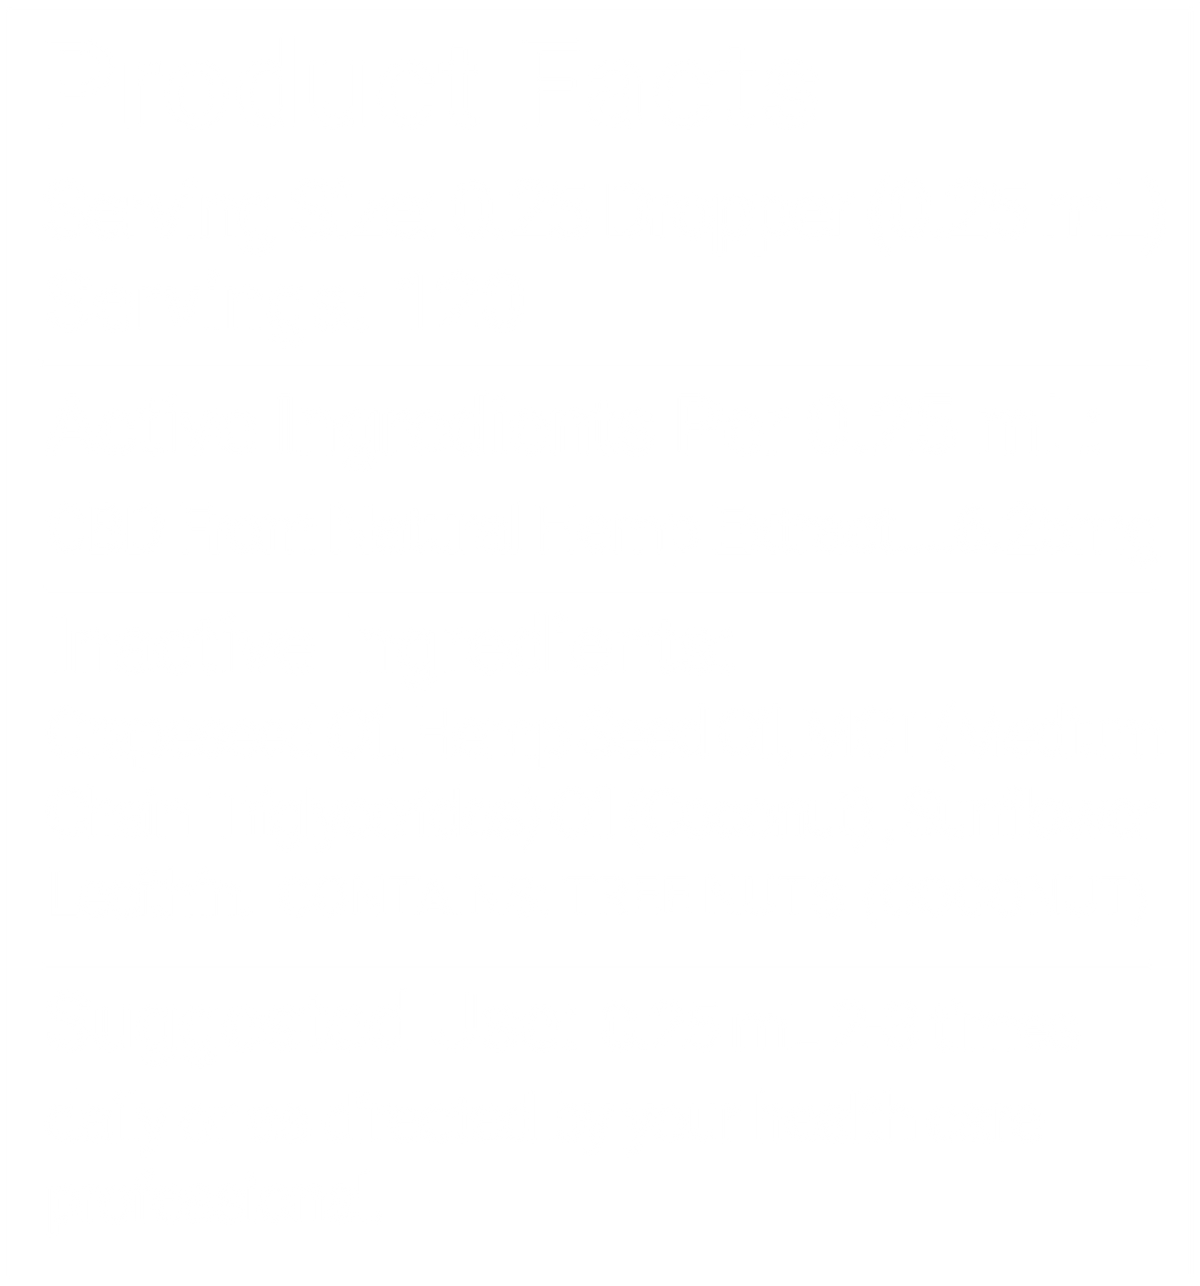 CBDOps heroes choice tincture, a CBD tincture oil product facts.